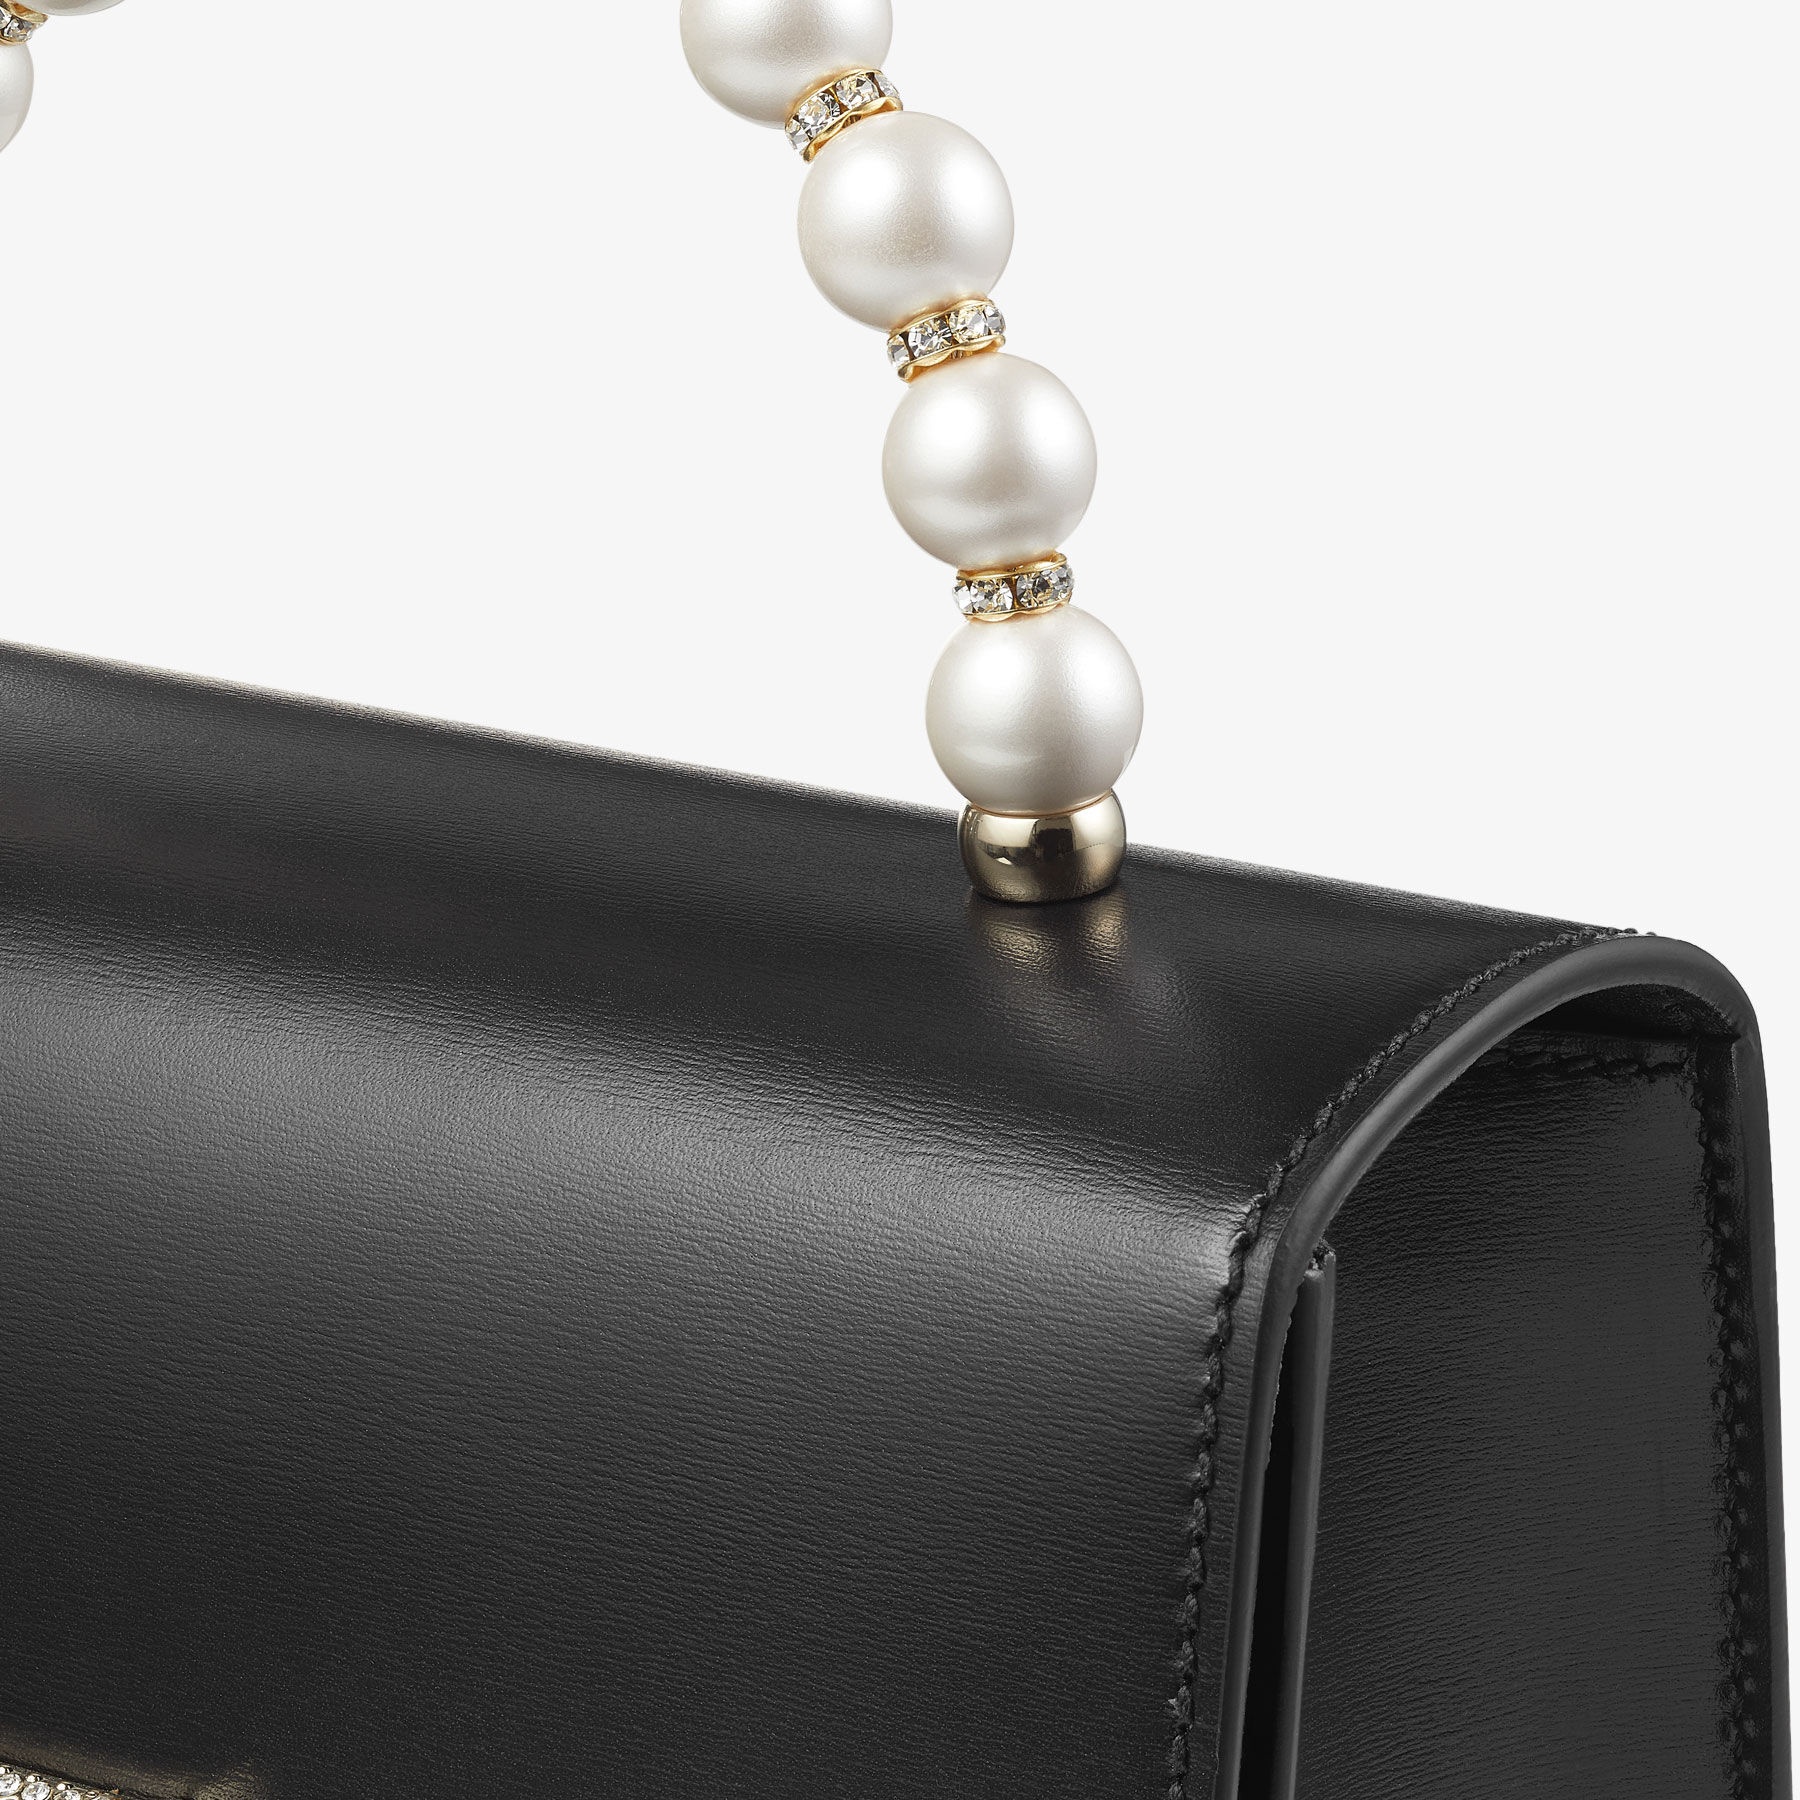 Avenue Top Handle/S
Black Box Leather Top Handle Bag with Pearls - 3